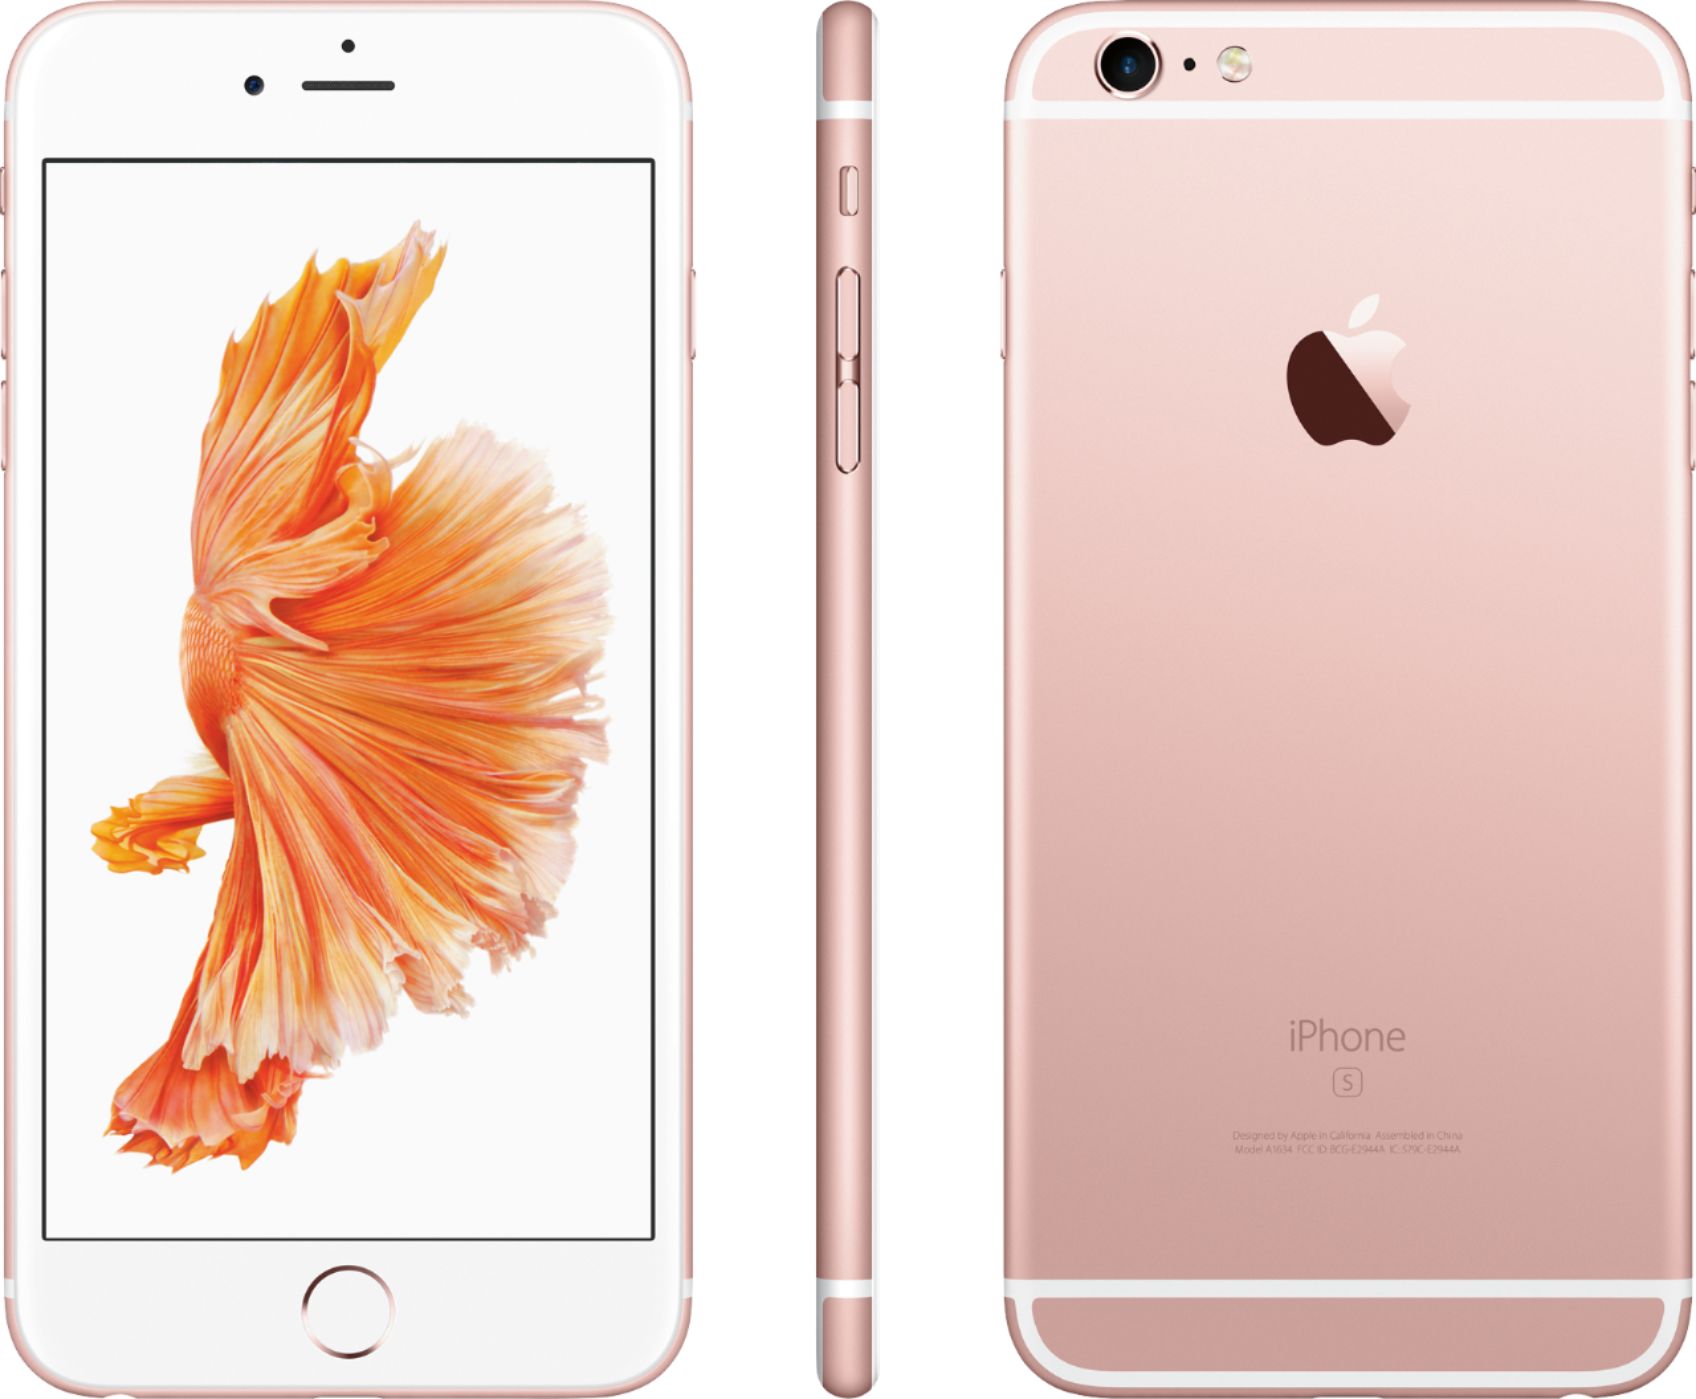 Apple 6s Plus 32GB Rose gold MN372LL/A - Best Buy